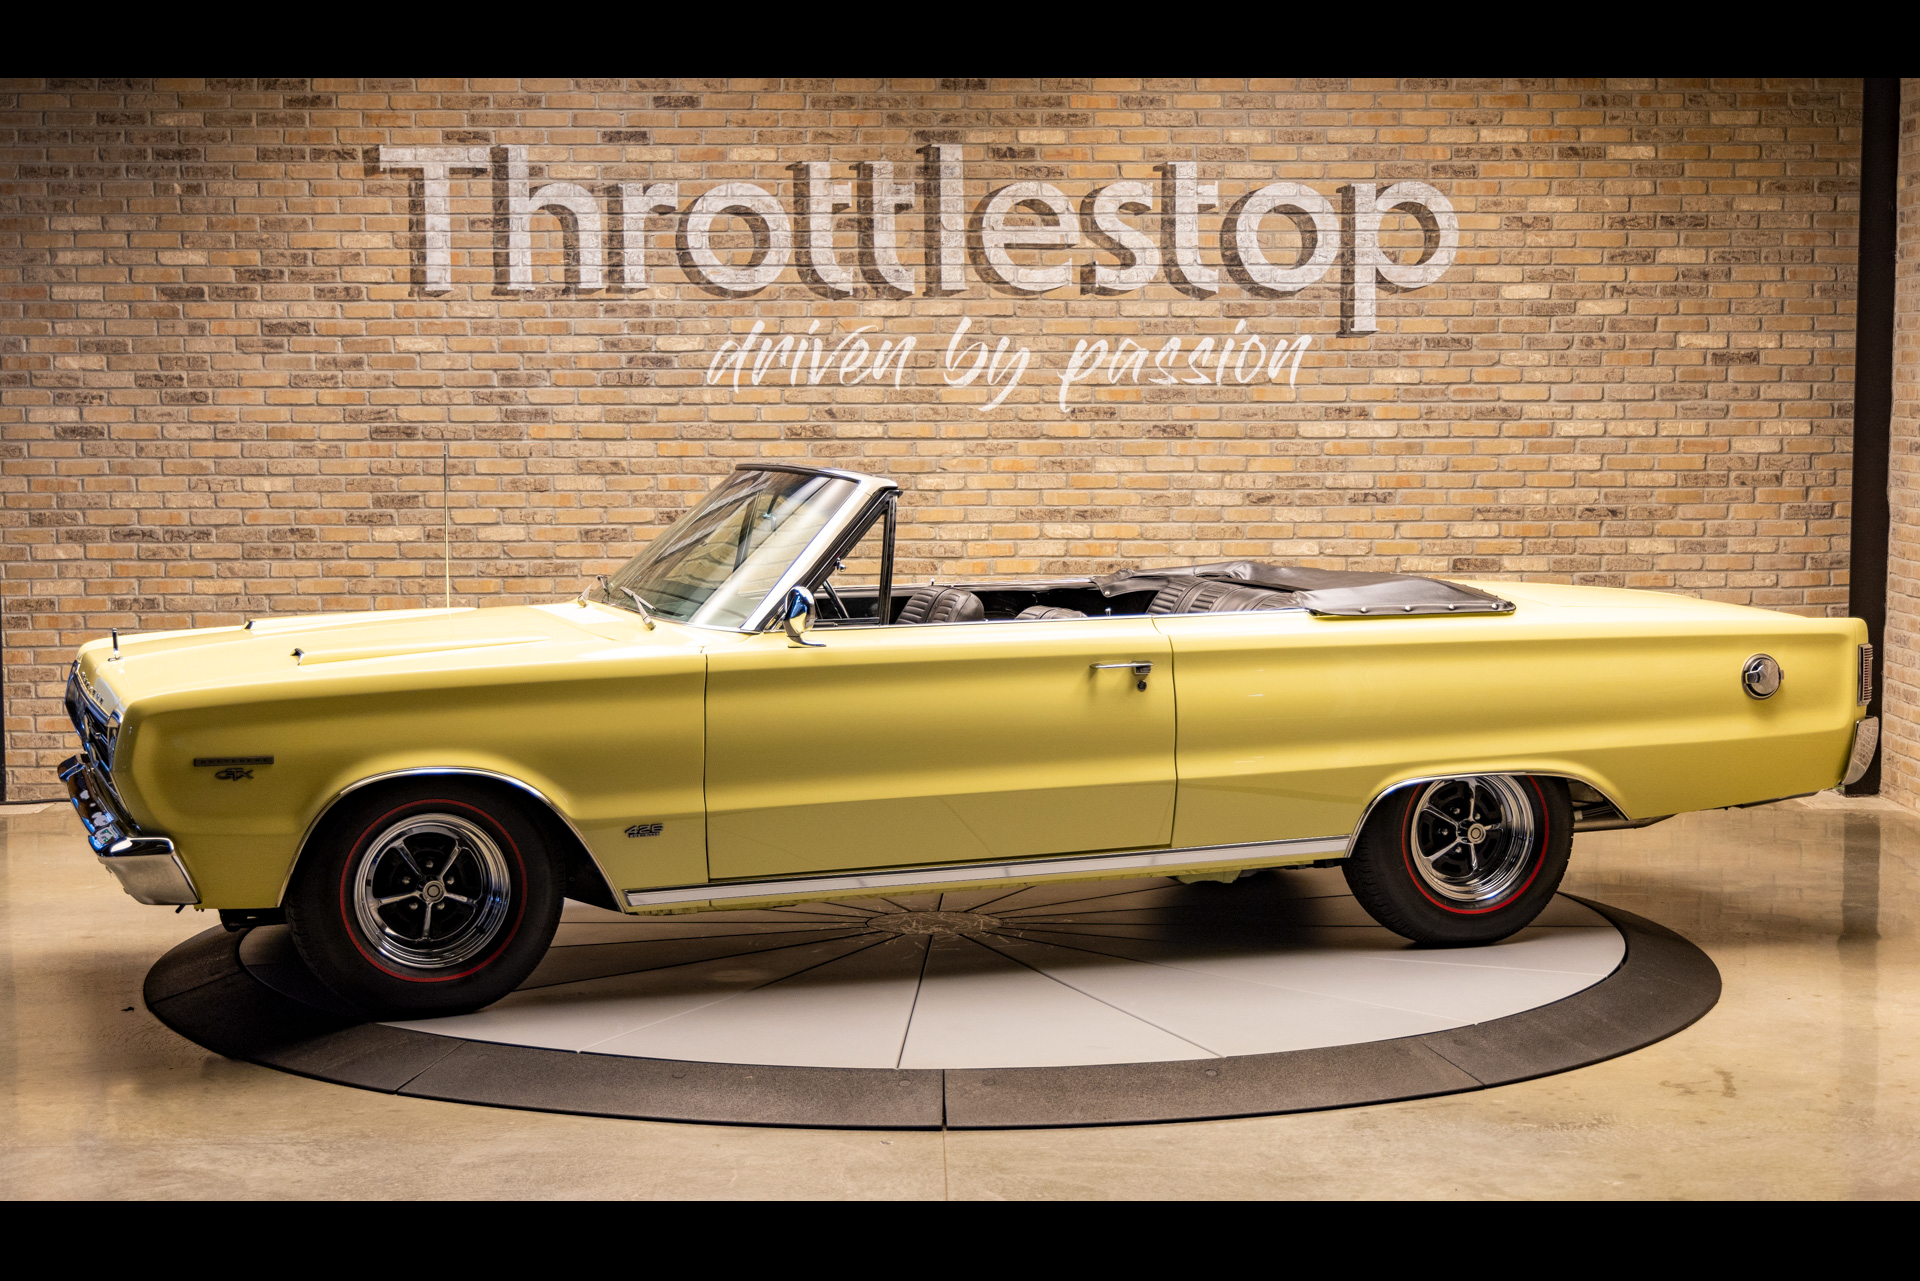 813173 | 1967 Plymouth Belvedere Hemi GTX Convertible | Throttlestop | Automotive and Motorcycle Consignment Dealer